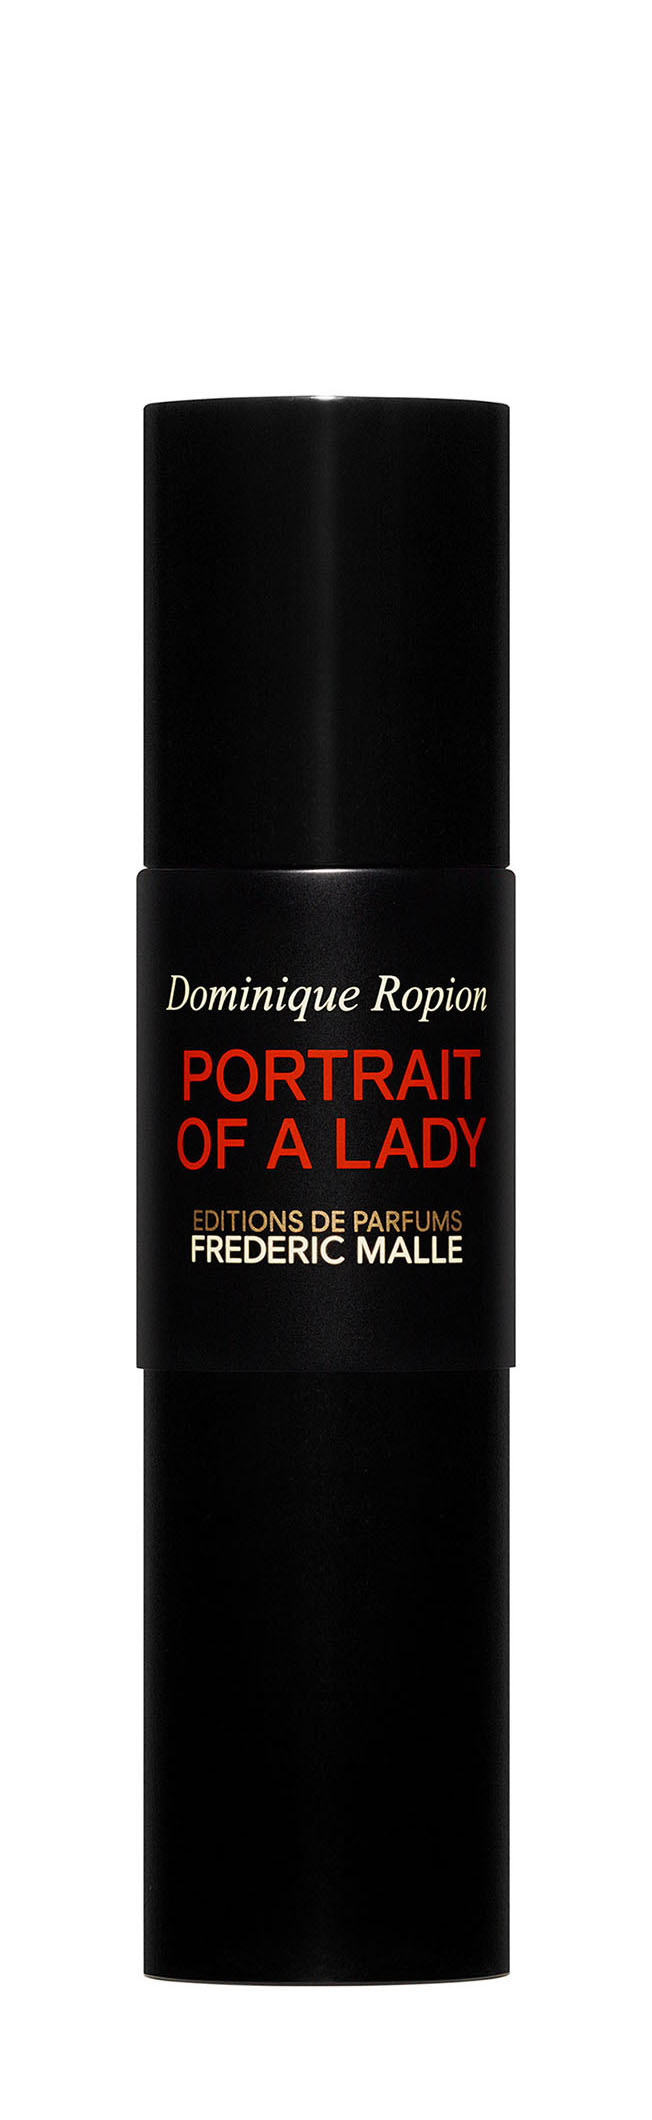 Парфюмерная вода Frederic Malle Portrait of a Lady 30 мл